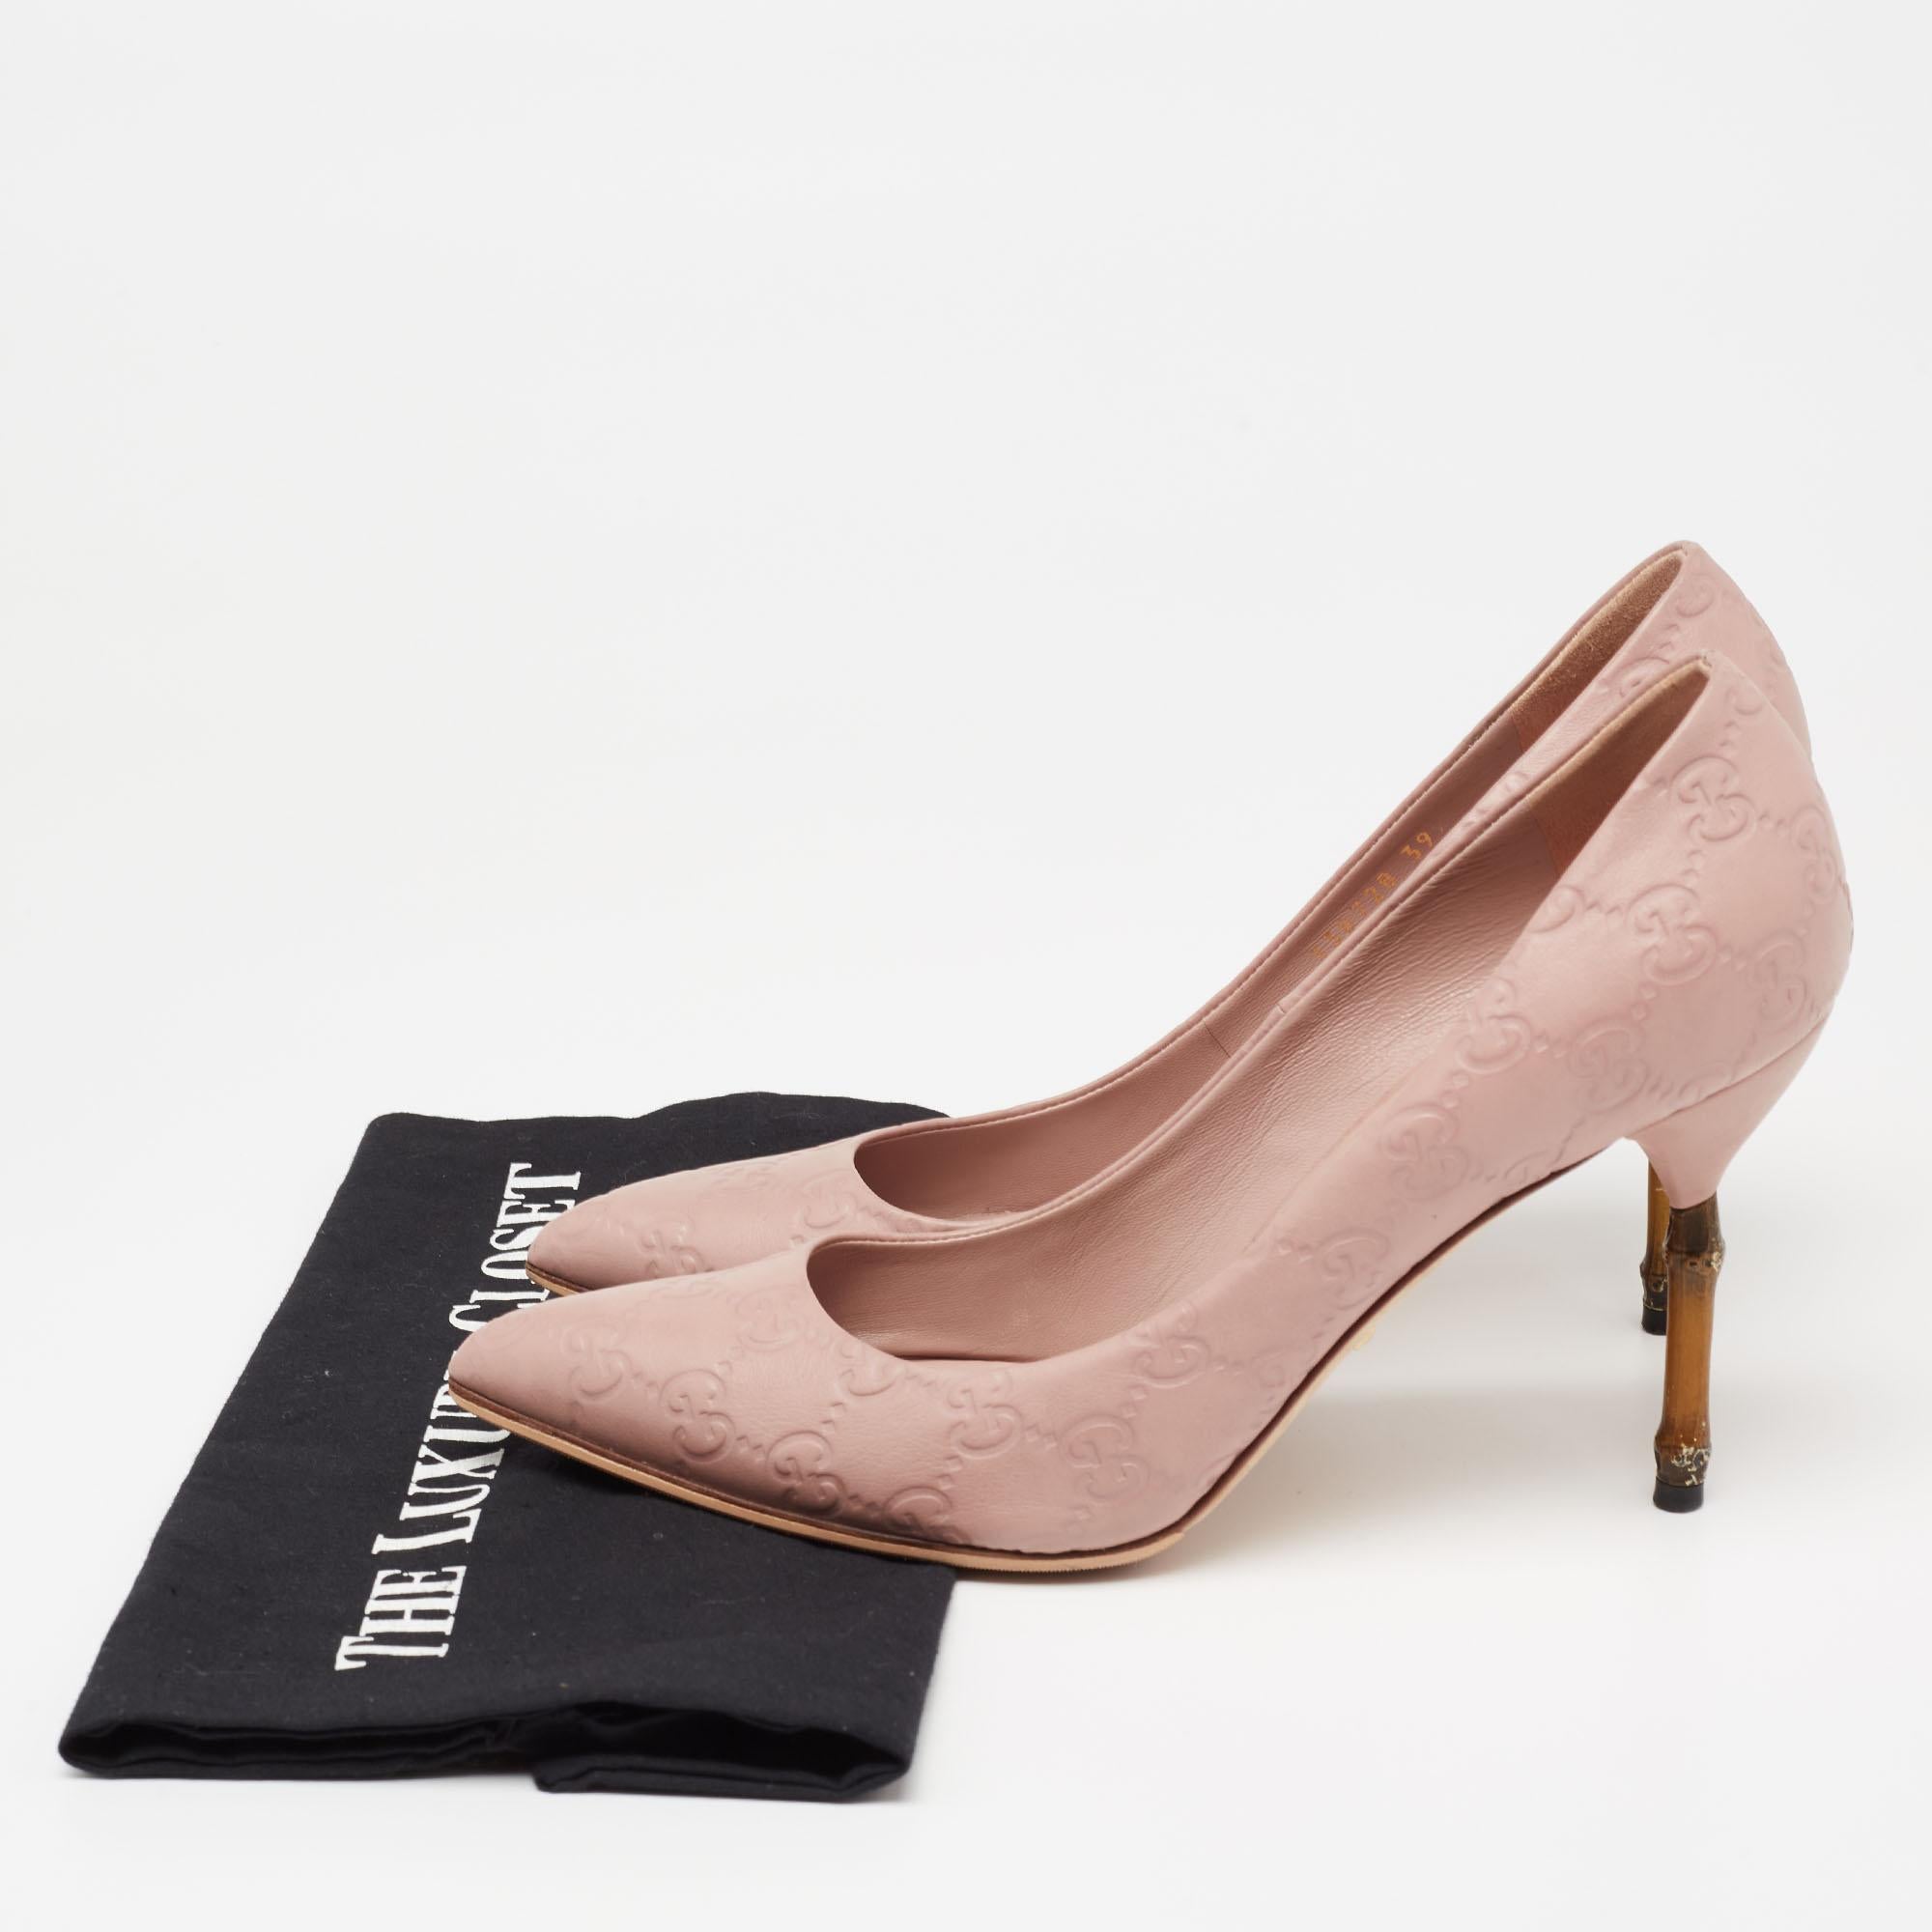 Gucci Dusty Pink Guccissima Leather Horsebit Kristen Bamboo Heel Pumps Size 39 3